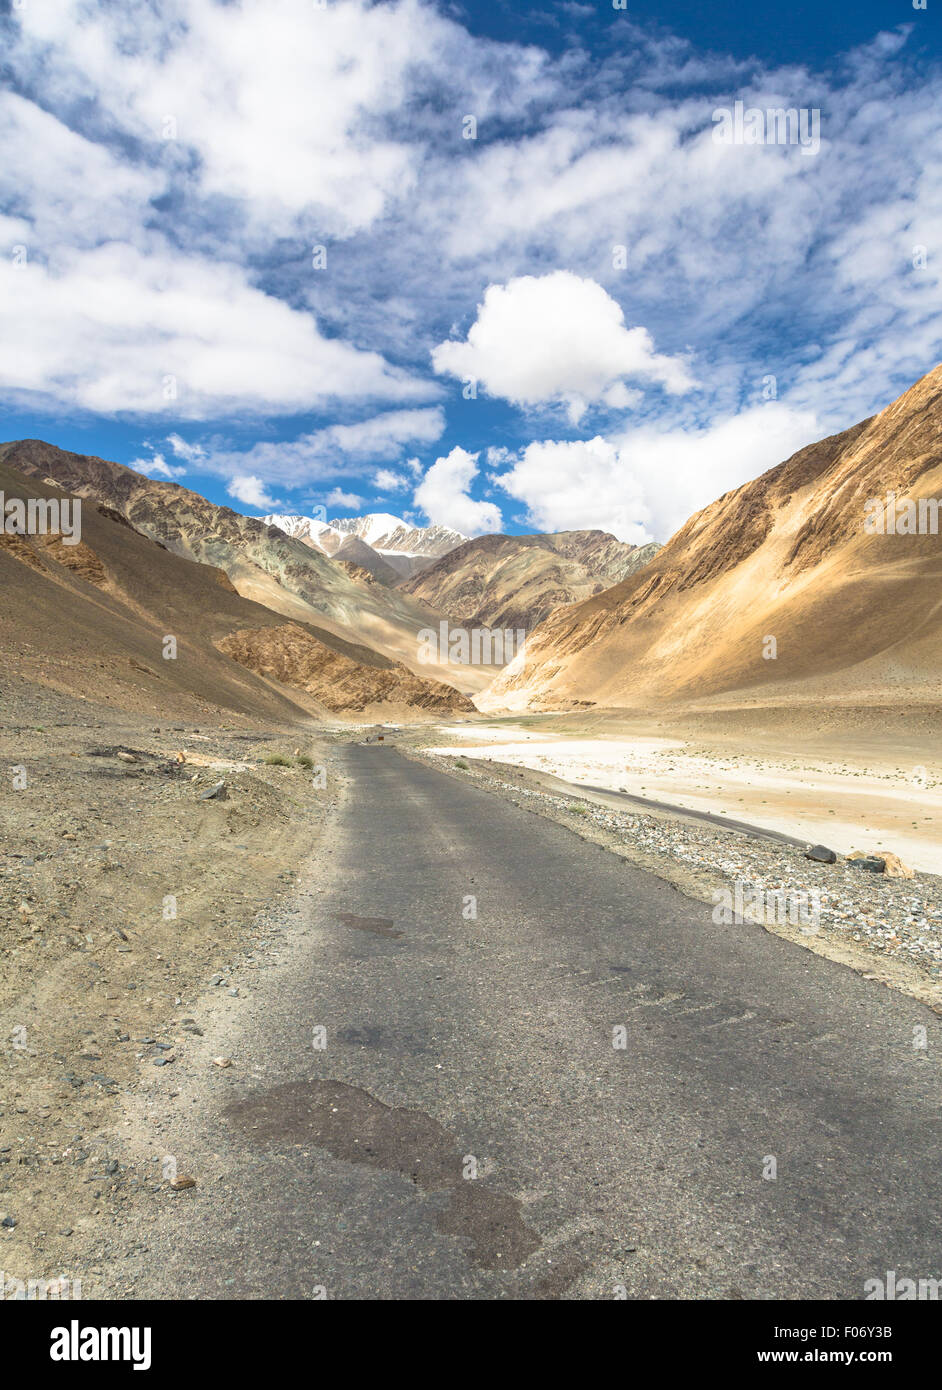 On the road in Ladakh, India Stock Photo - Alamy